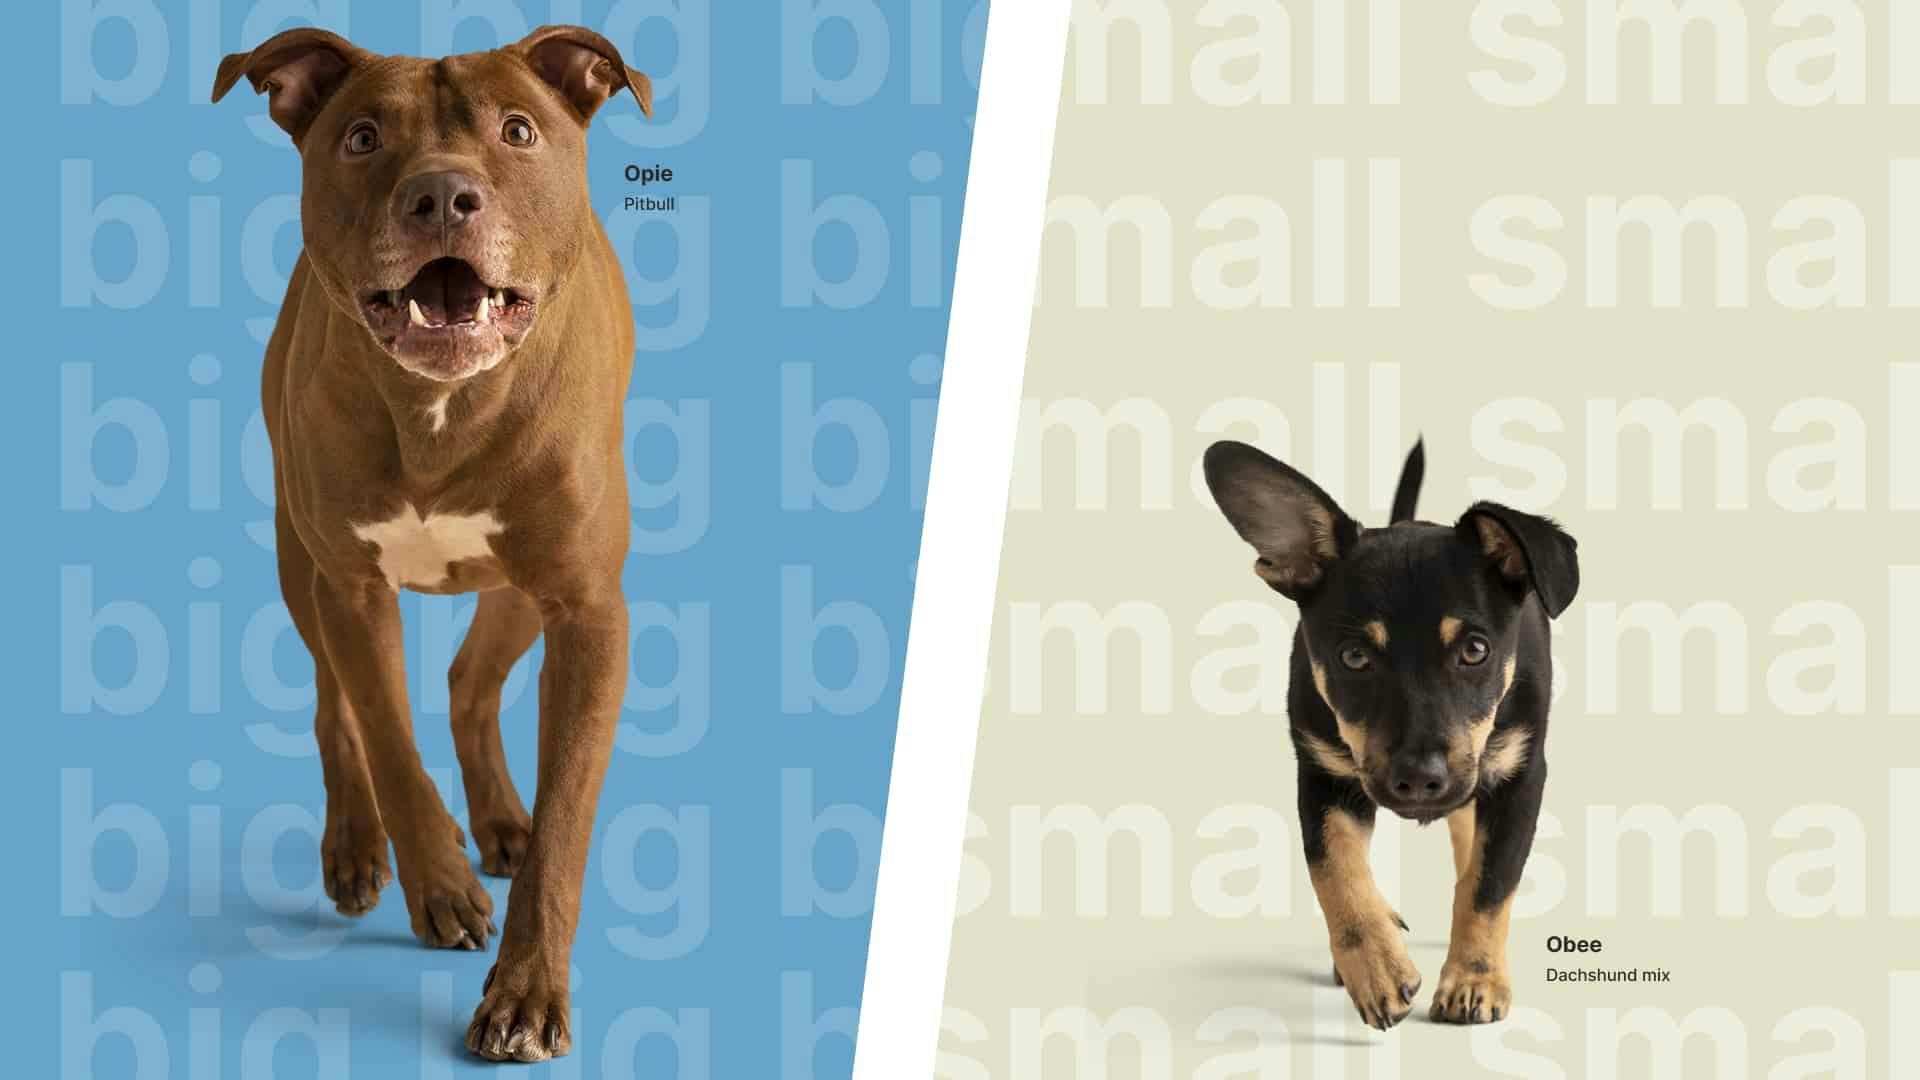 Cover Image for Why do big dogs have unusually short lifespans compared to small dogs?